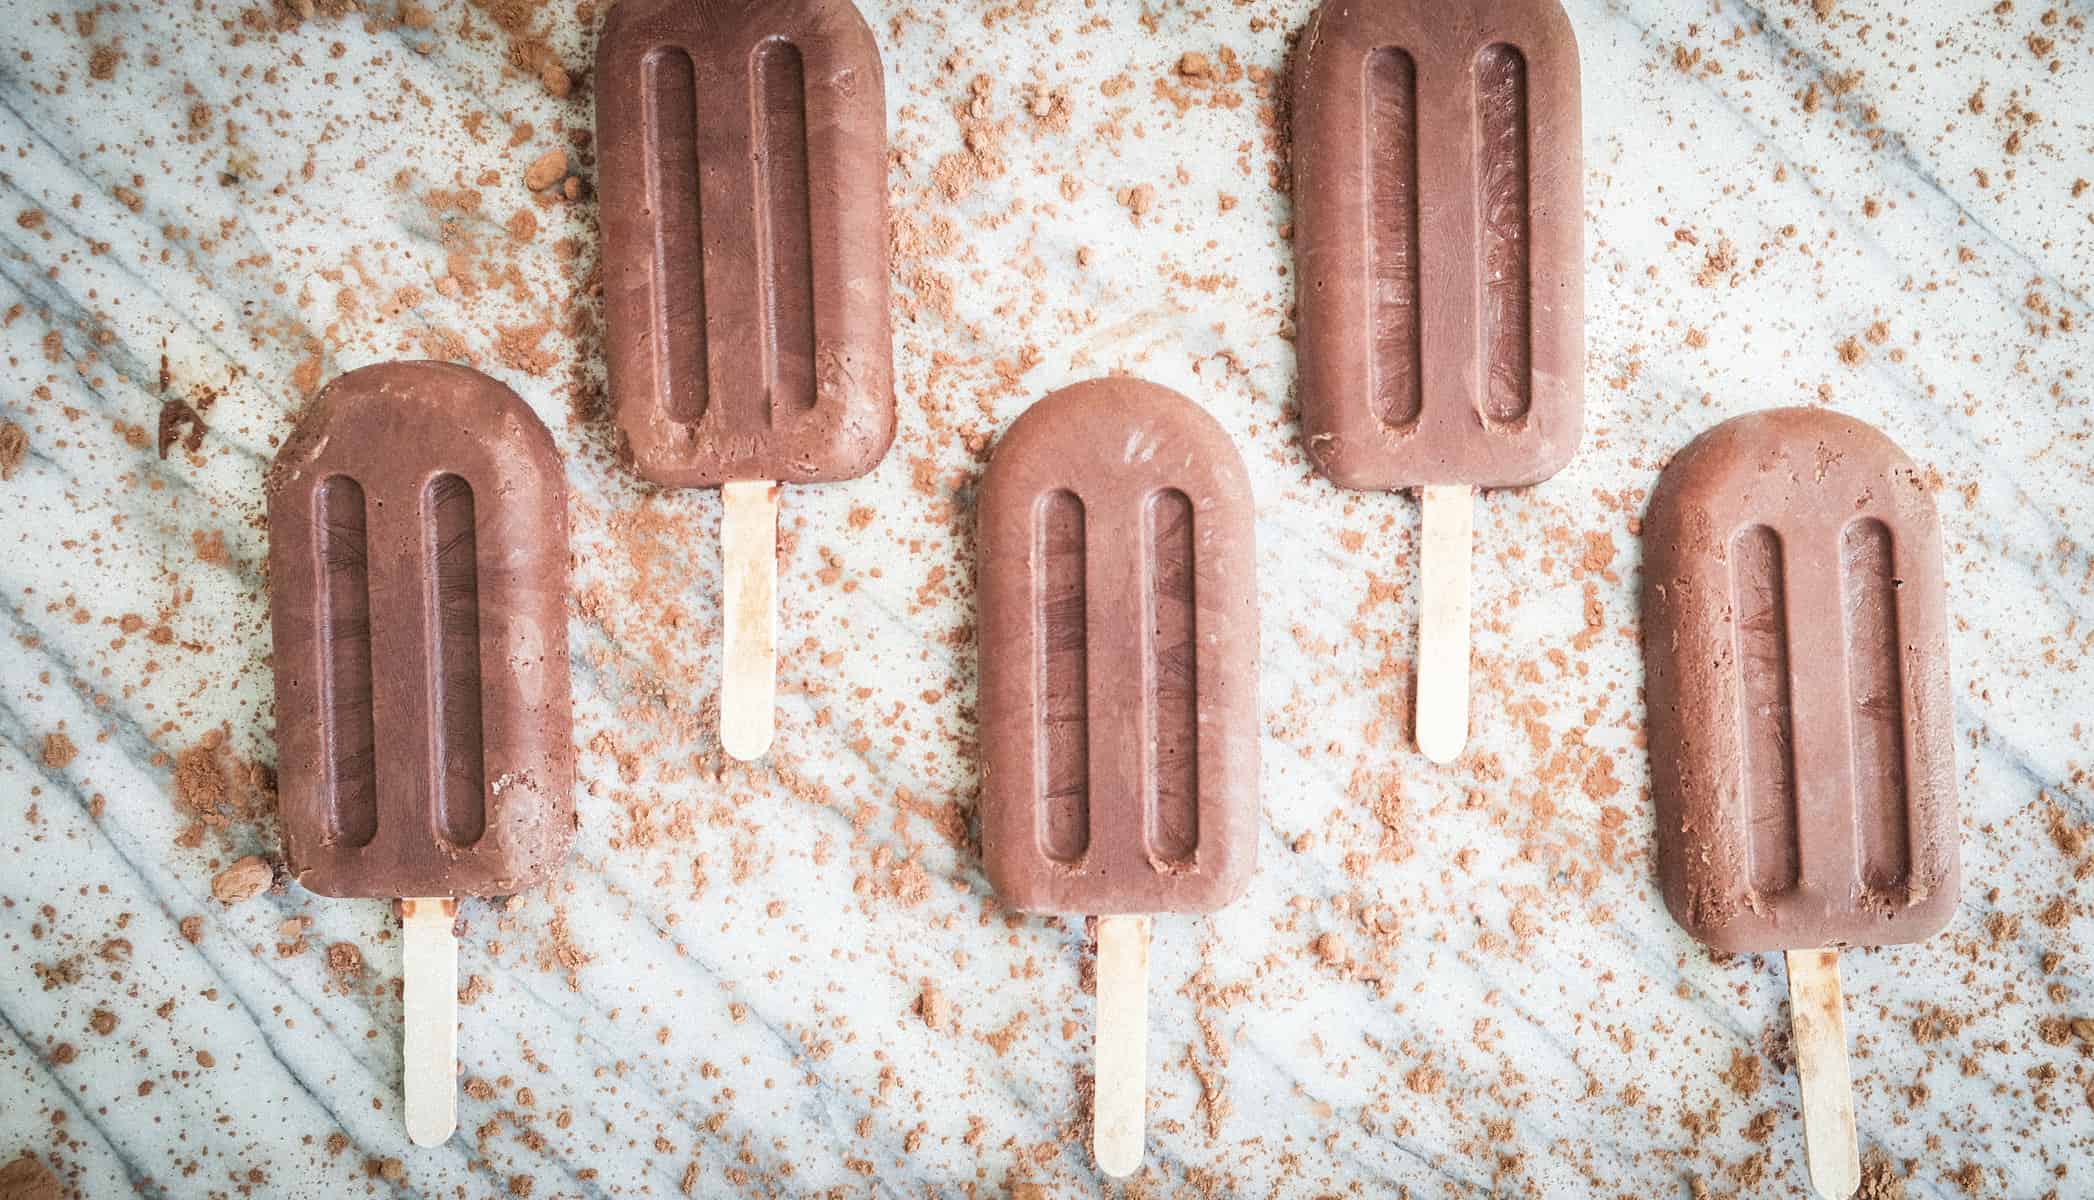 completed chocolate fudgsicles